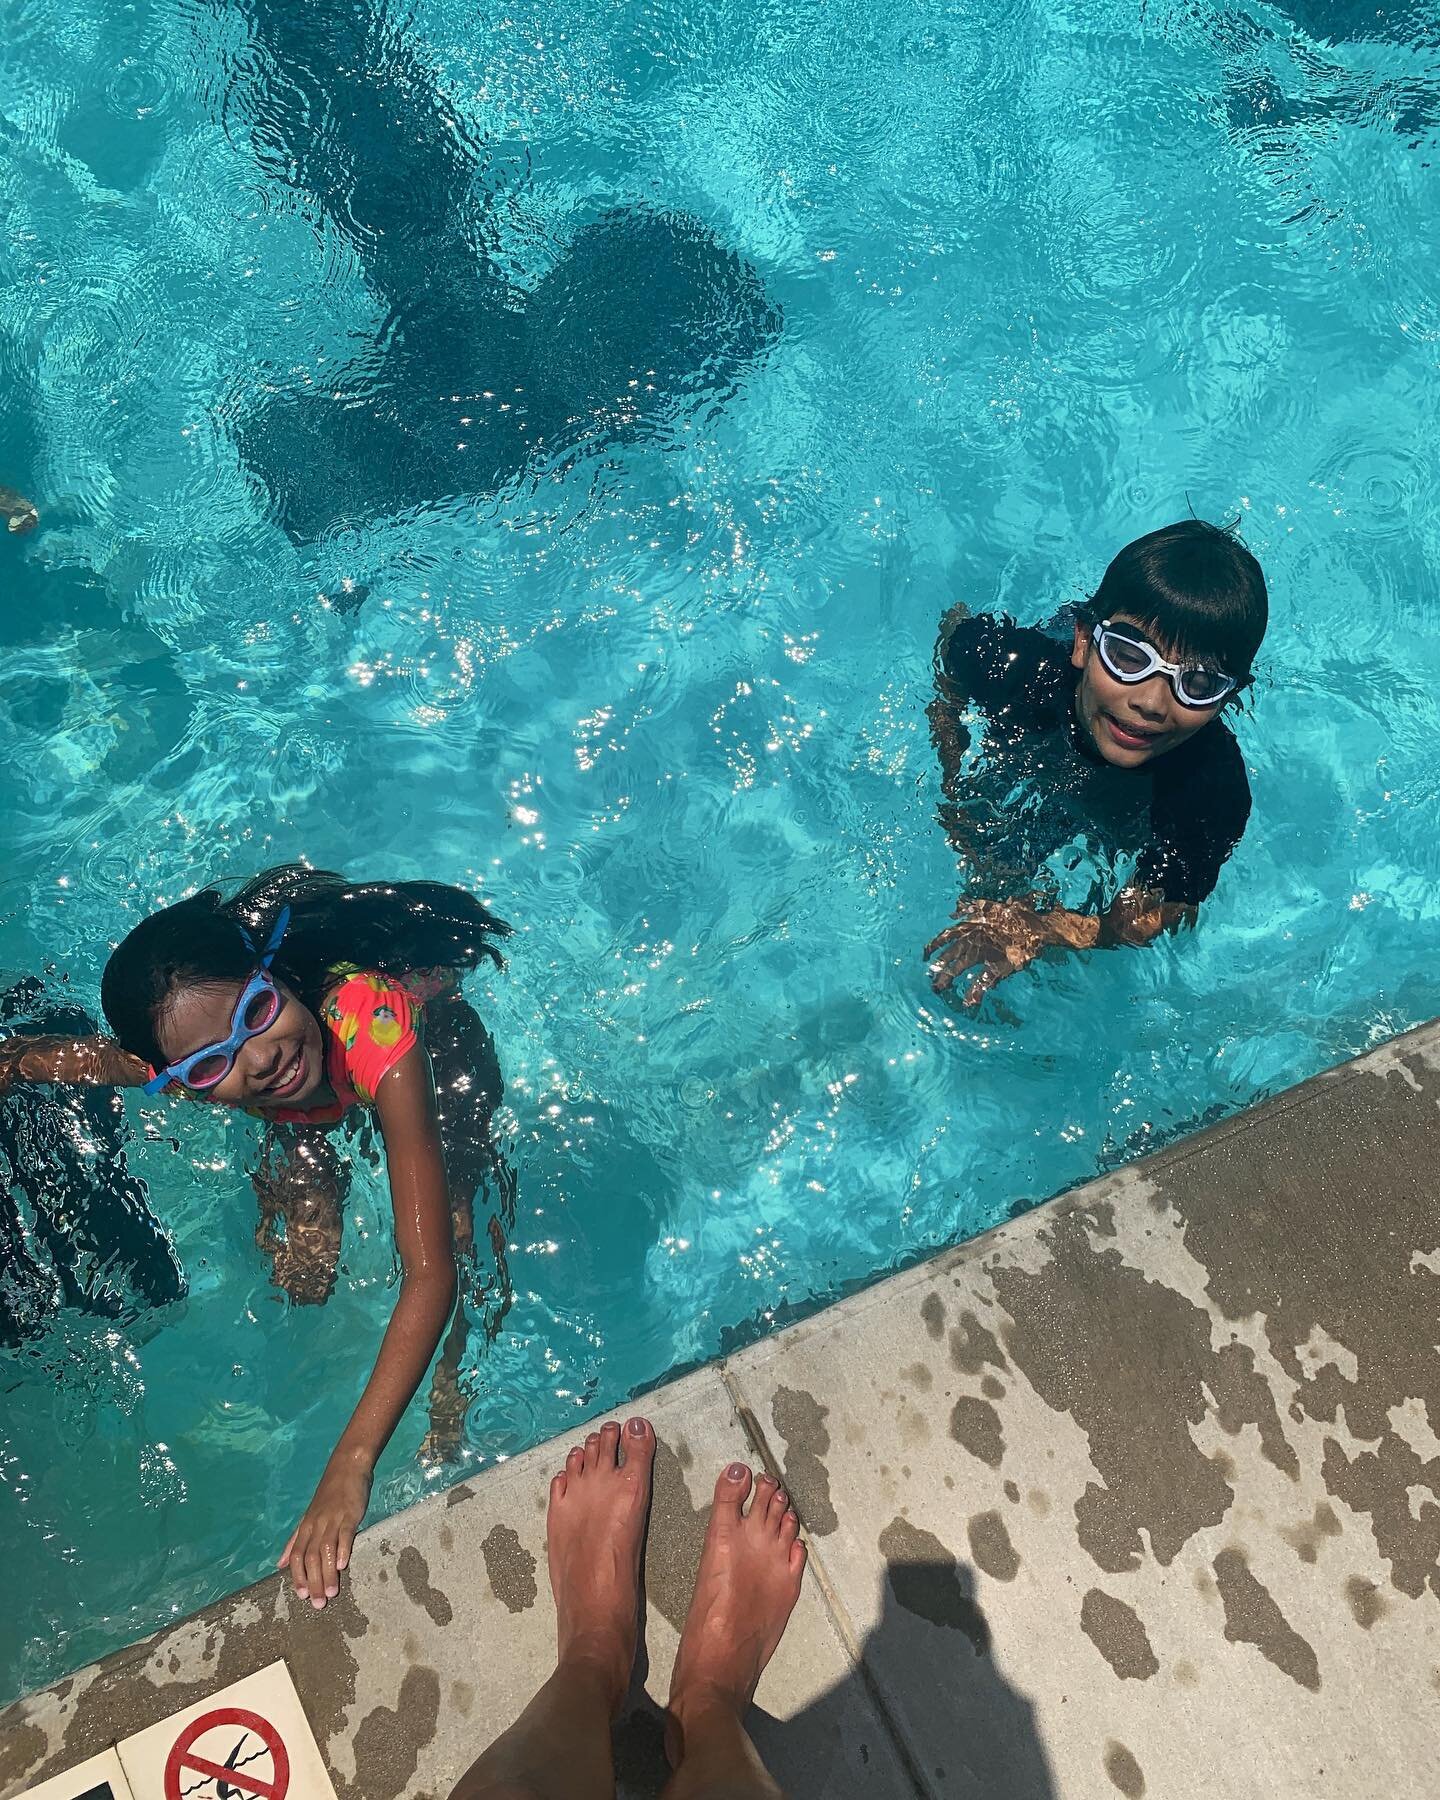 This summer I&rsquo;m fully committing to the pool. Not just because it&rsquo;s fun, but because it&rsquo;s an opportunity to connect with others and with my kids. As often as possible I try to invite friends to join us at the pool. We sit and talk a